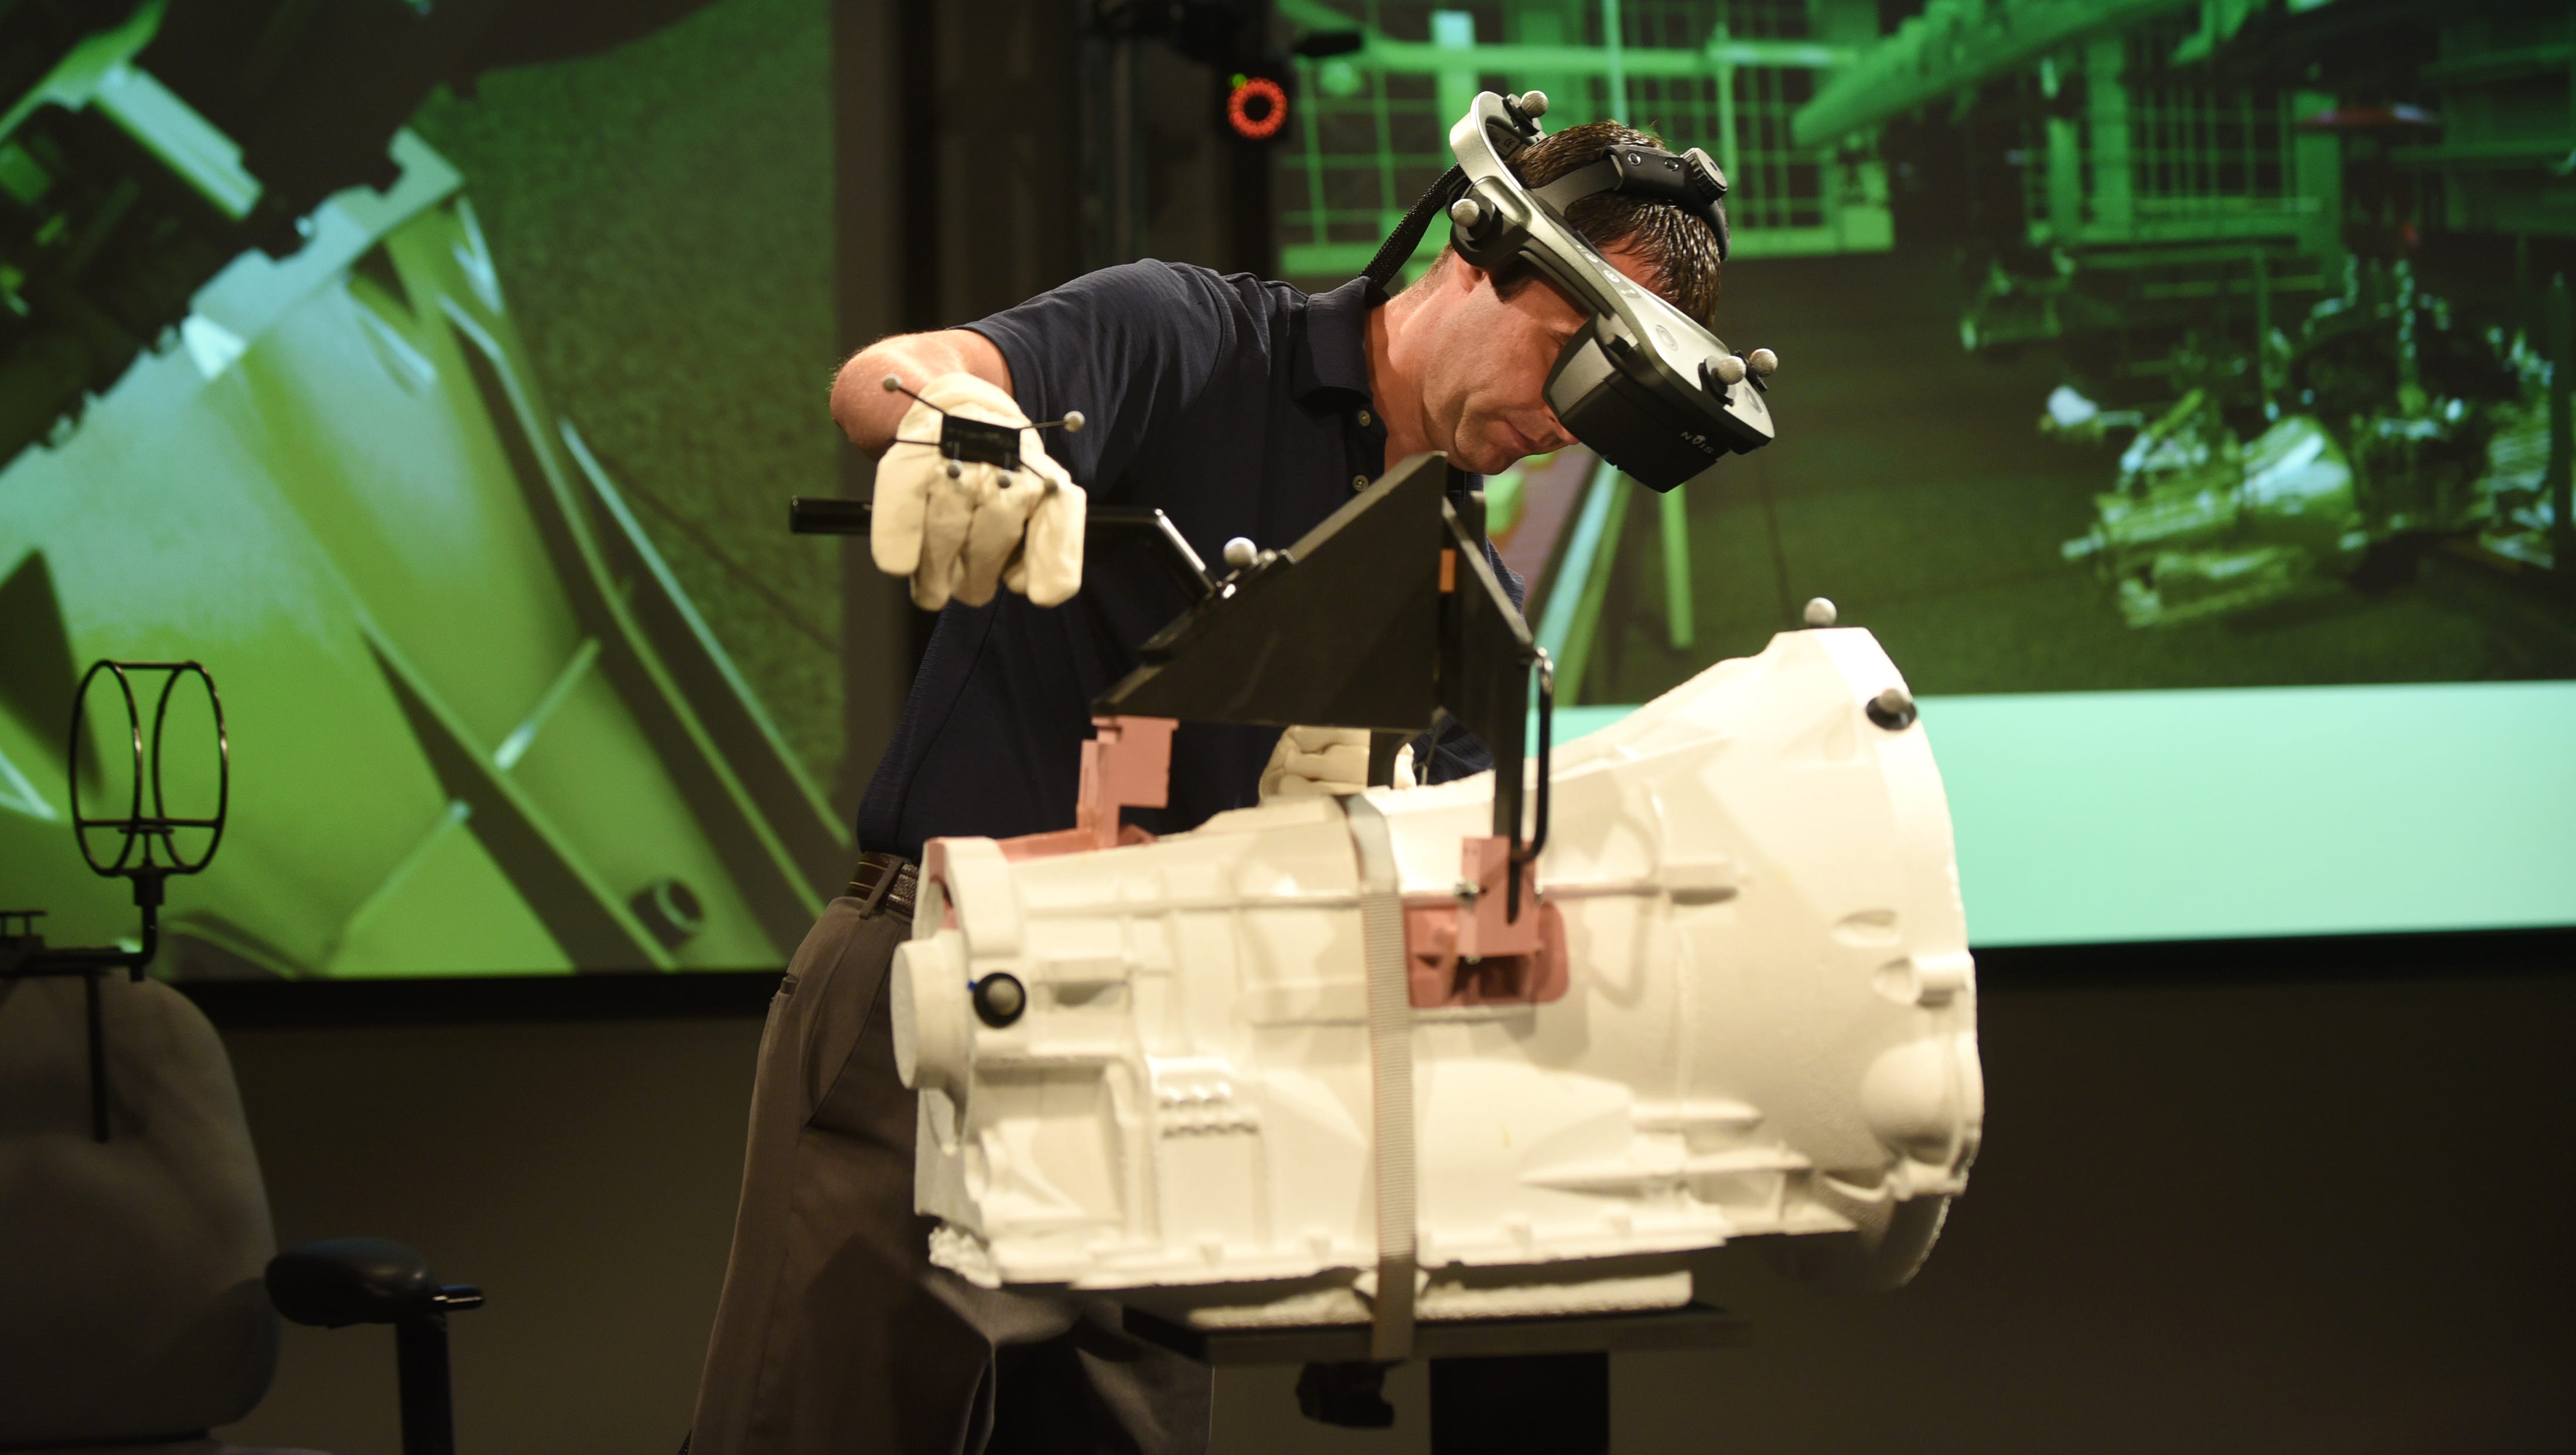 Rob McLean wears immersive virtual reality headgear as he demonstrates the marriage of a transmission to engine.